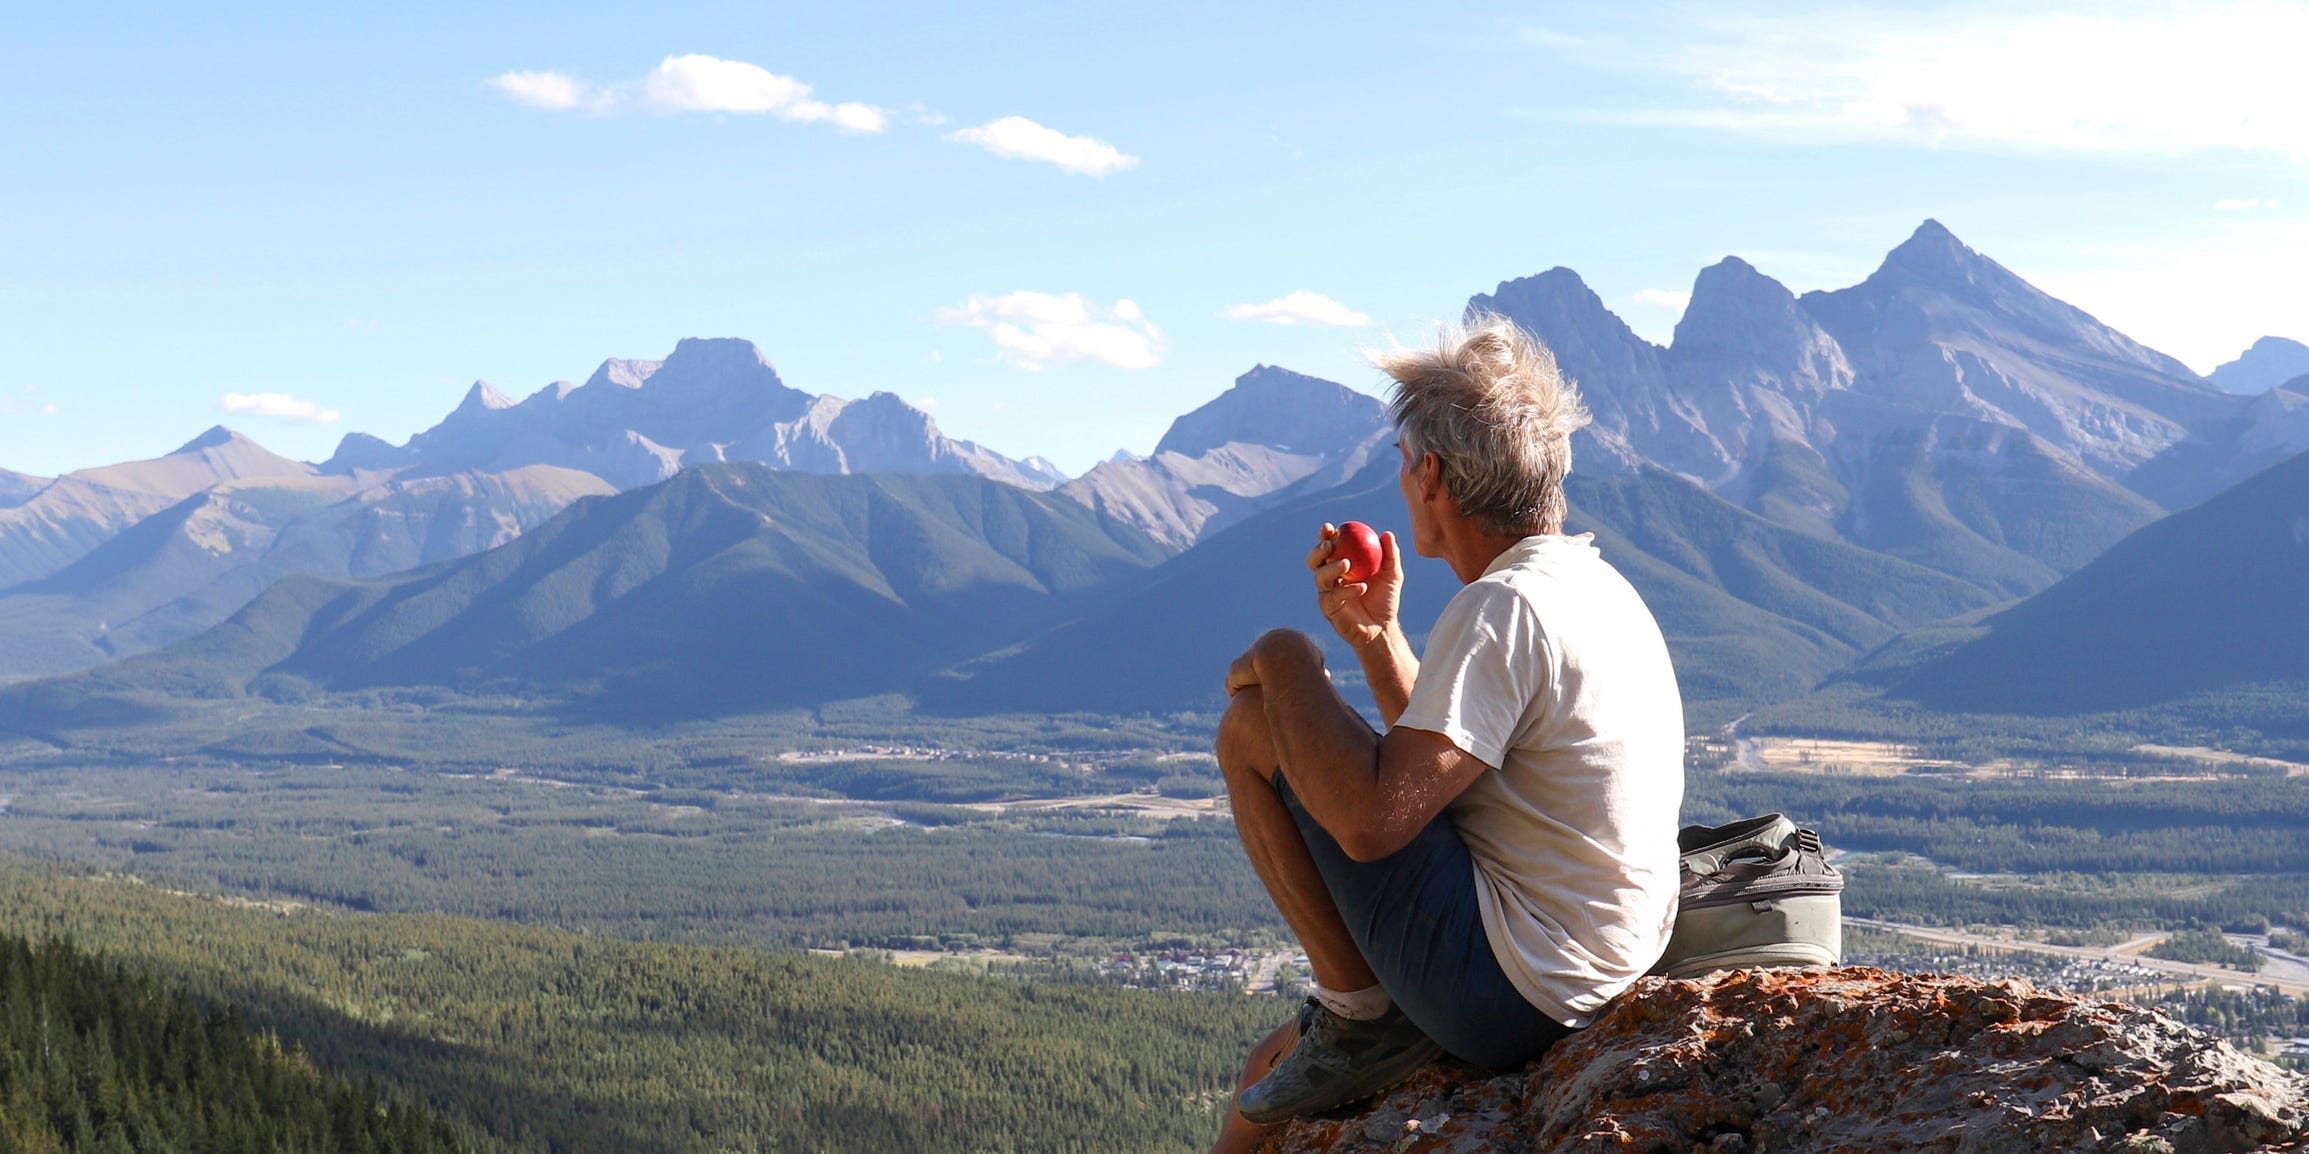 A man sitting, eating an apple mindfully while he looks onto a vast mountainous landscape.